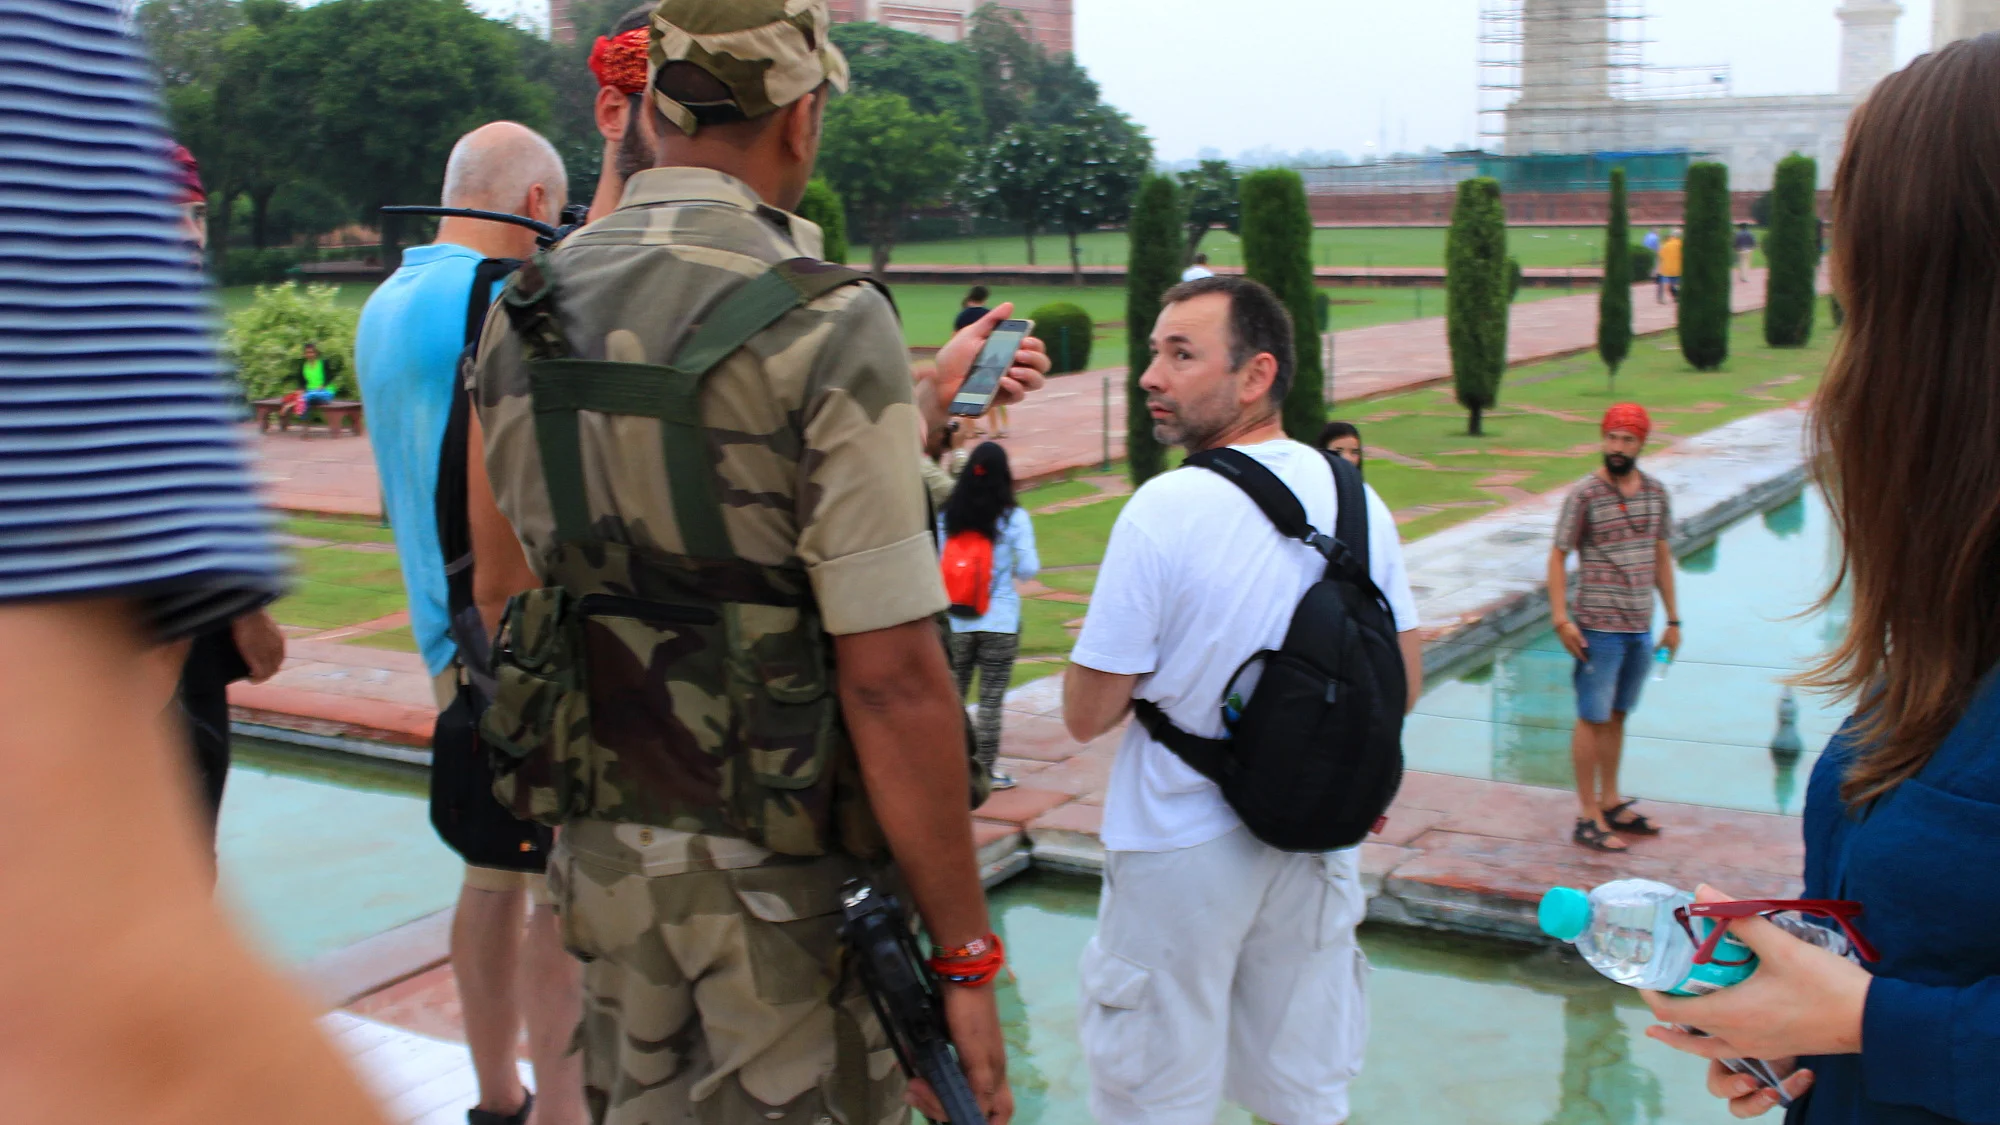 An armed soldier asks a group of tourists to delete their photos where they've posed in the lotus position for the camera.